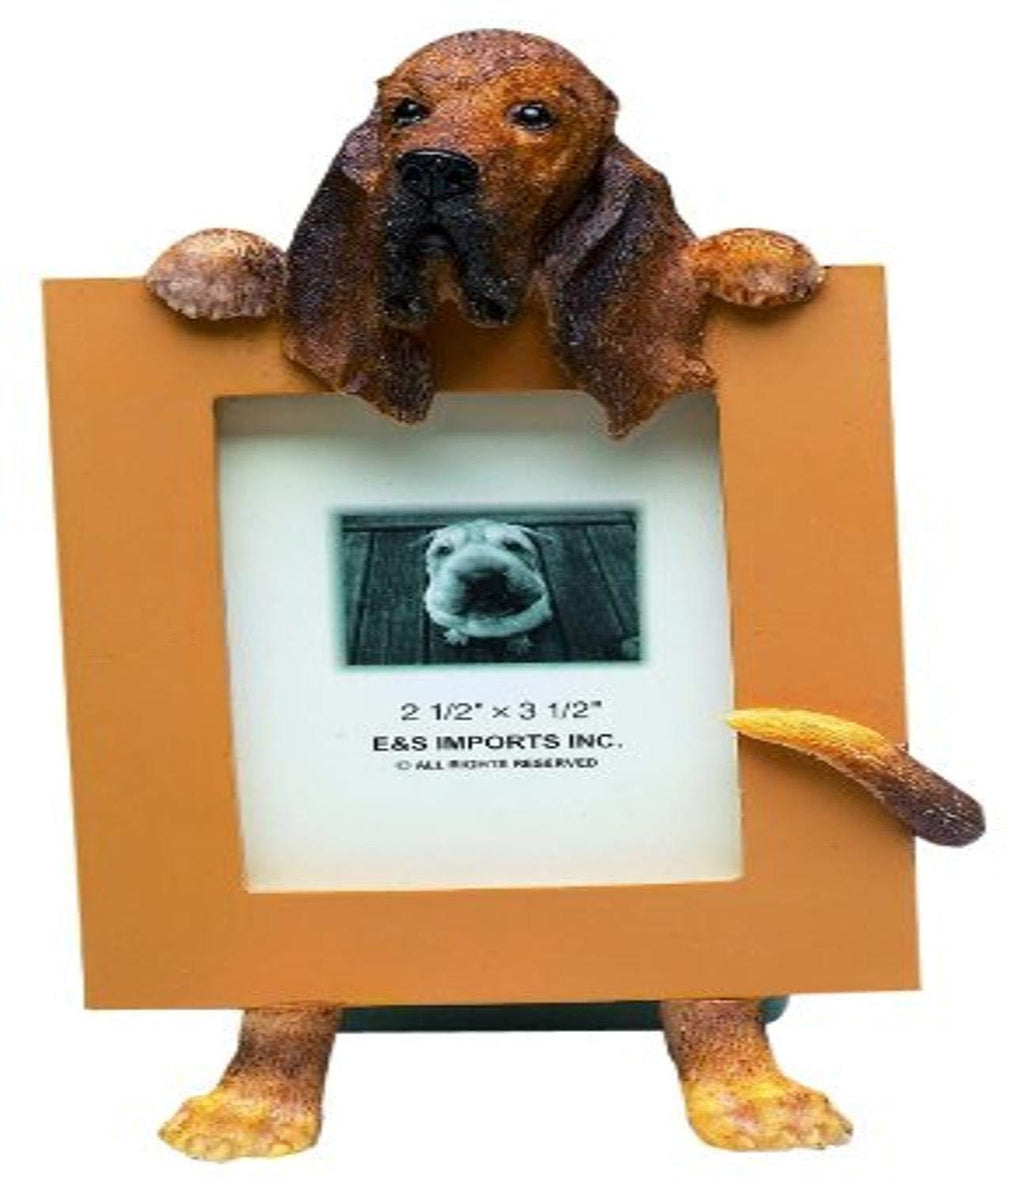 [Australia] - Bloodhound Picture Frame Holds Your Favorite 2.5 by 3.5 Inch Photo, Hand Painted Realistic Looking Bloodhound Stands 6 Inches Tall Holding Beautifully Crafted Frame, Unique and Special Bloodhound Gifts for Bloodhound Owners 